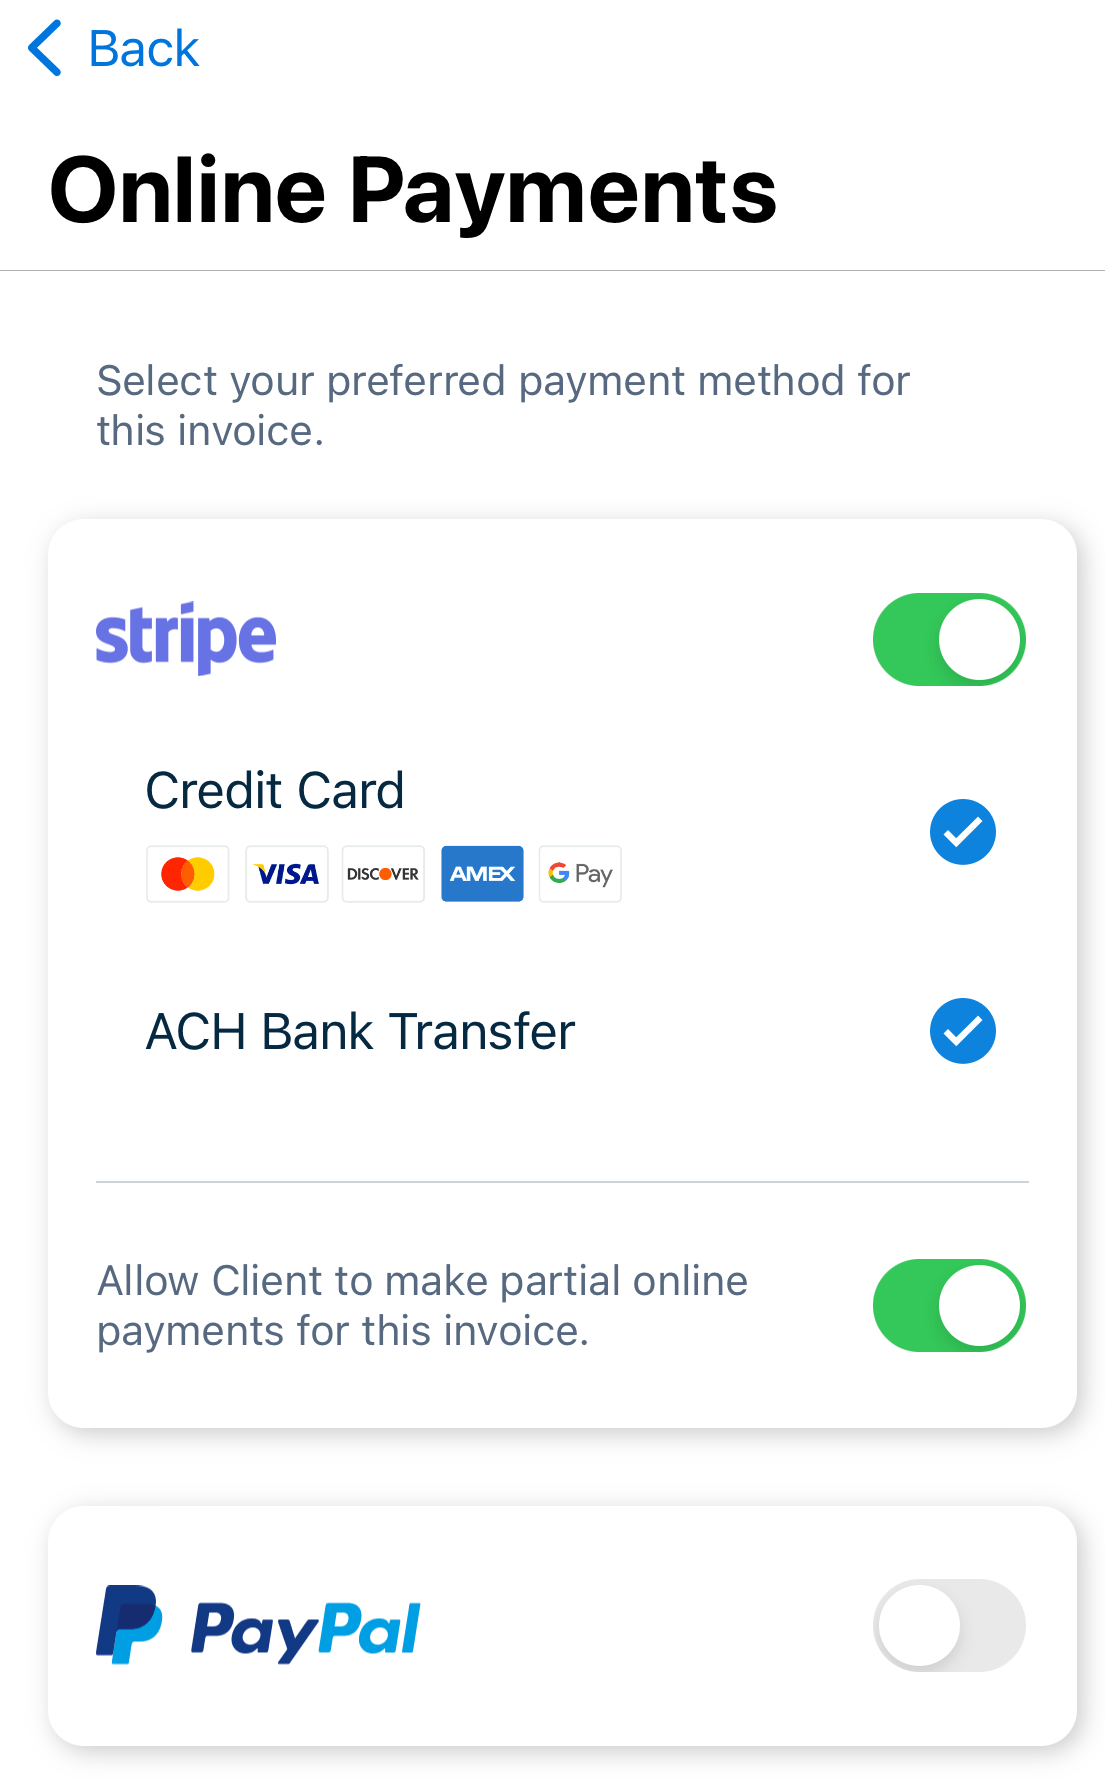 Stripe enabled with credit card and bank transfer options also enabled.